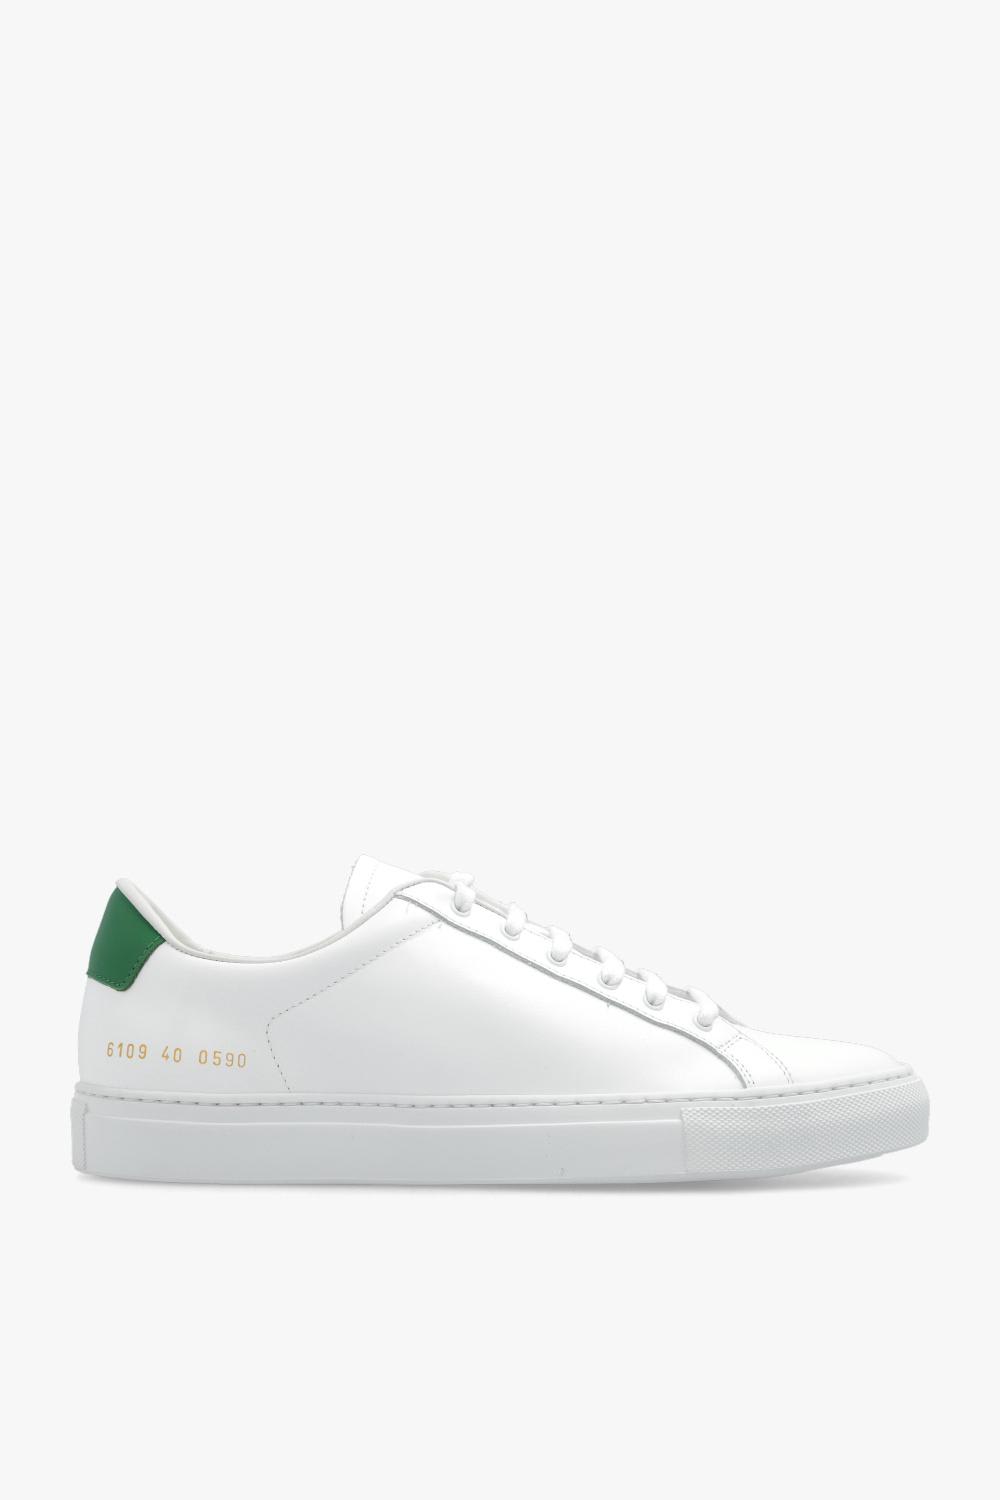 COMMON PROJECTS RETRO LOW trainers